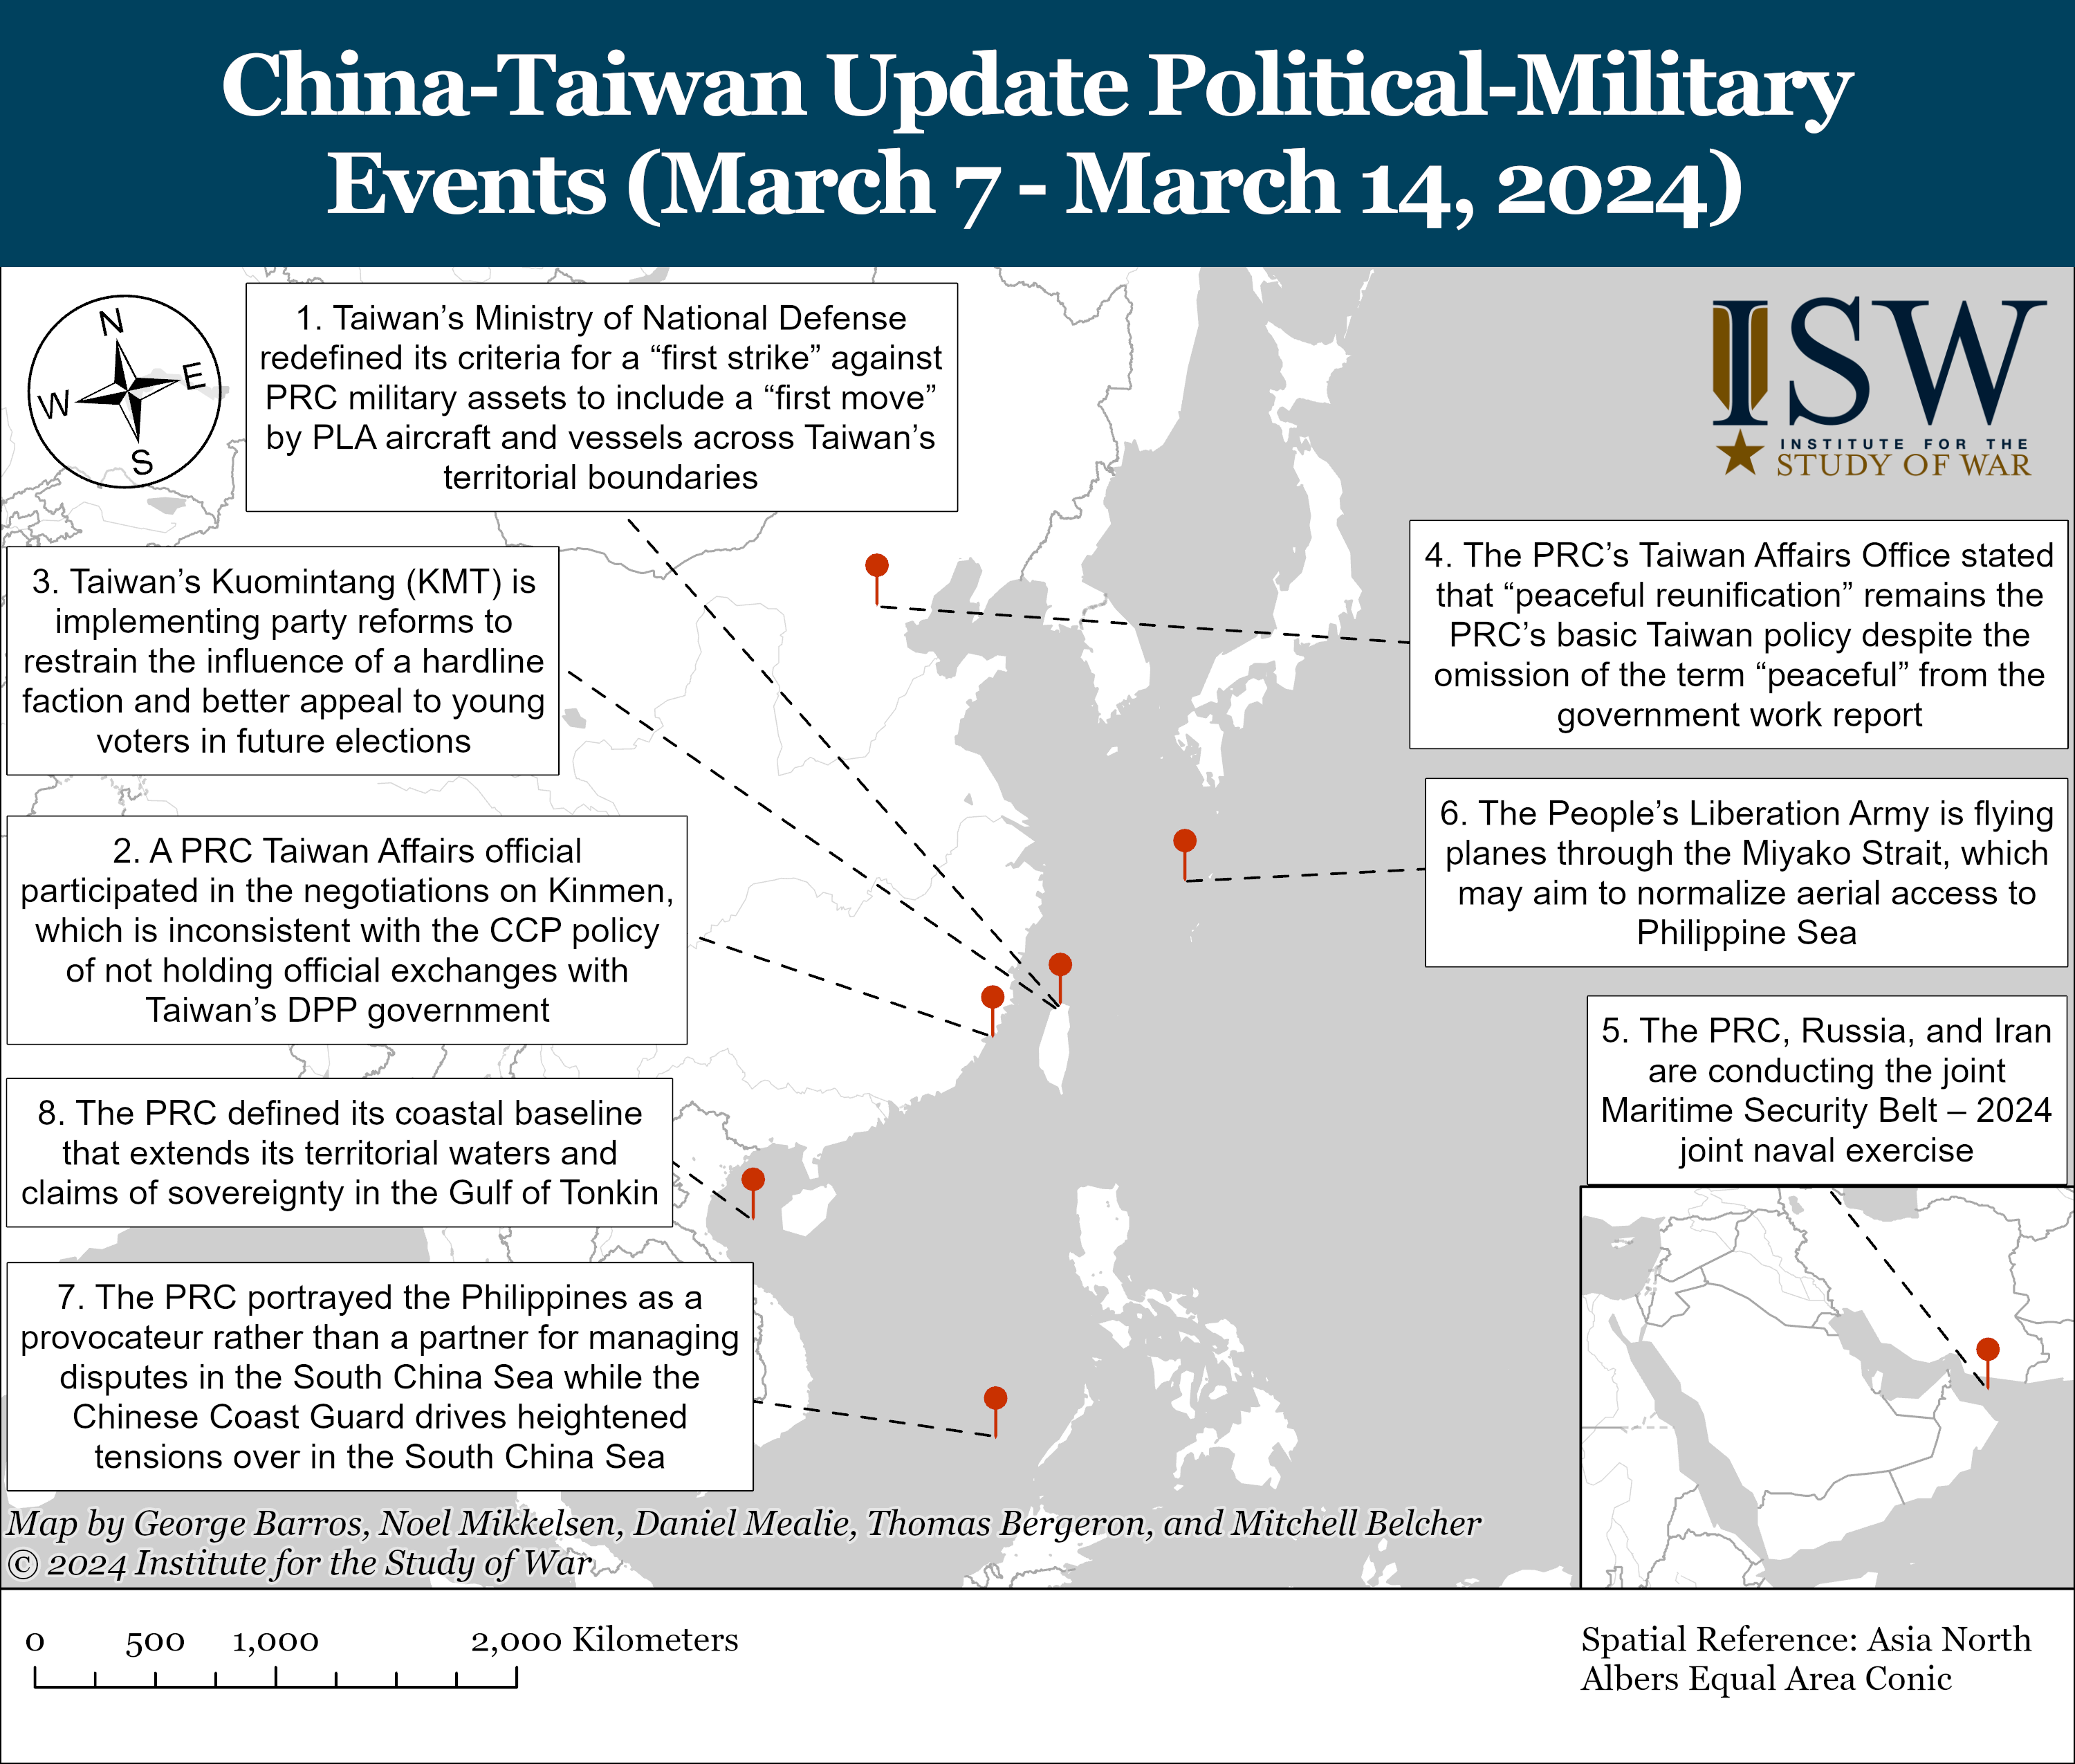 China-Taiwan Weekly Update, March 15, 2024 | Institute for the Study of War